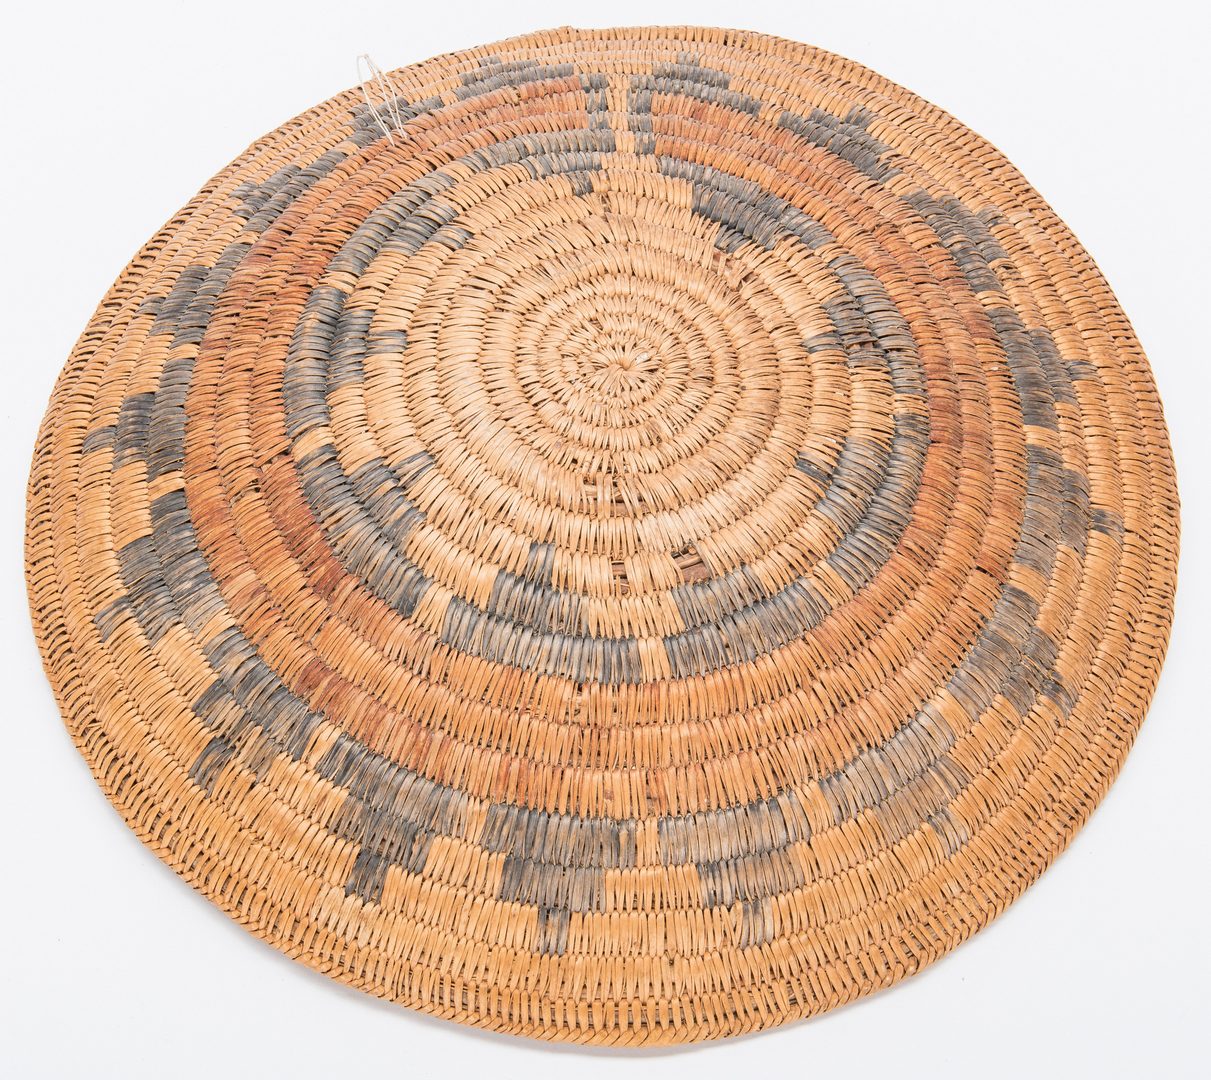 Lot 269: 19 Assorted Native American Baskets